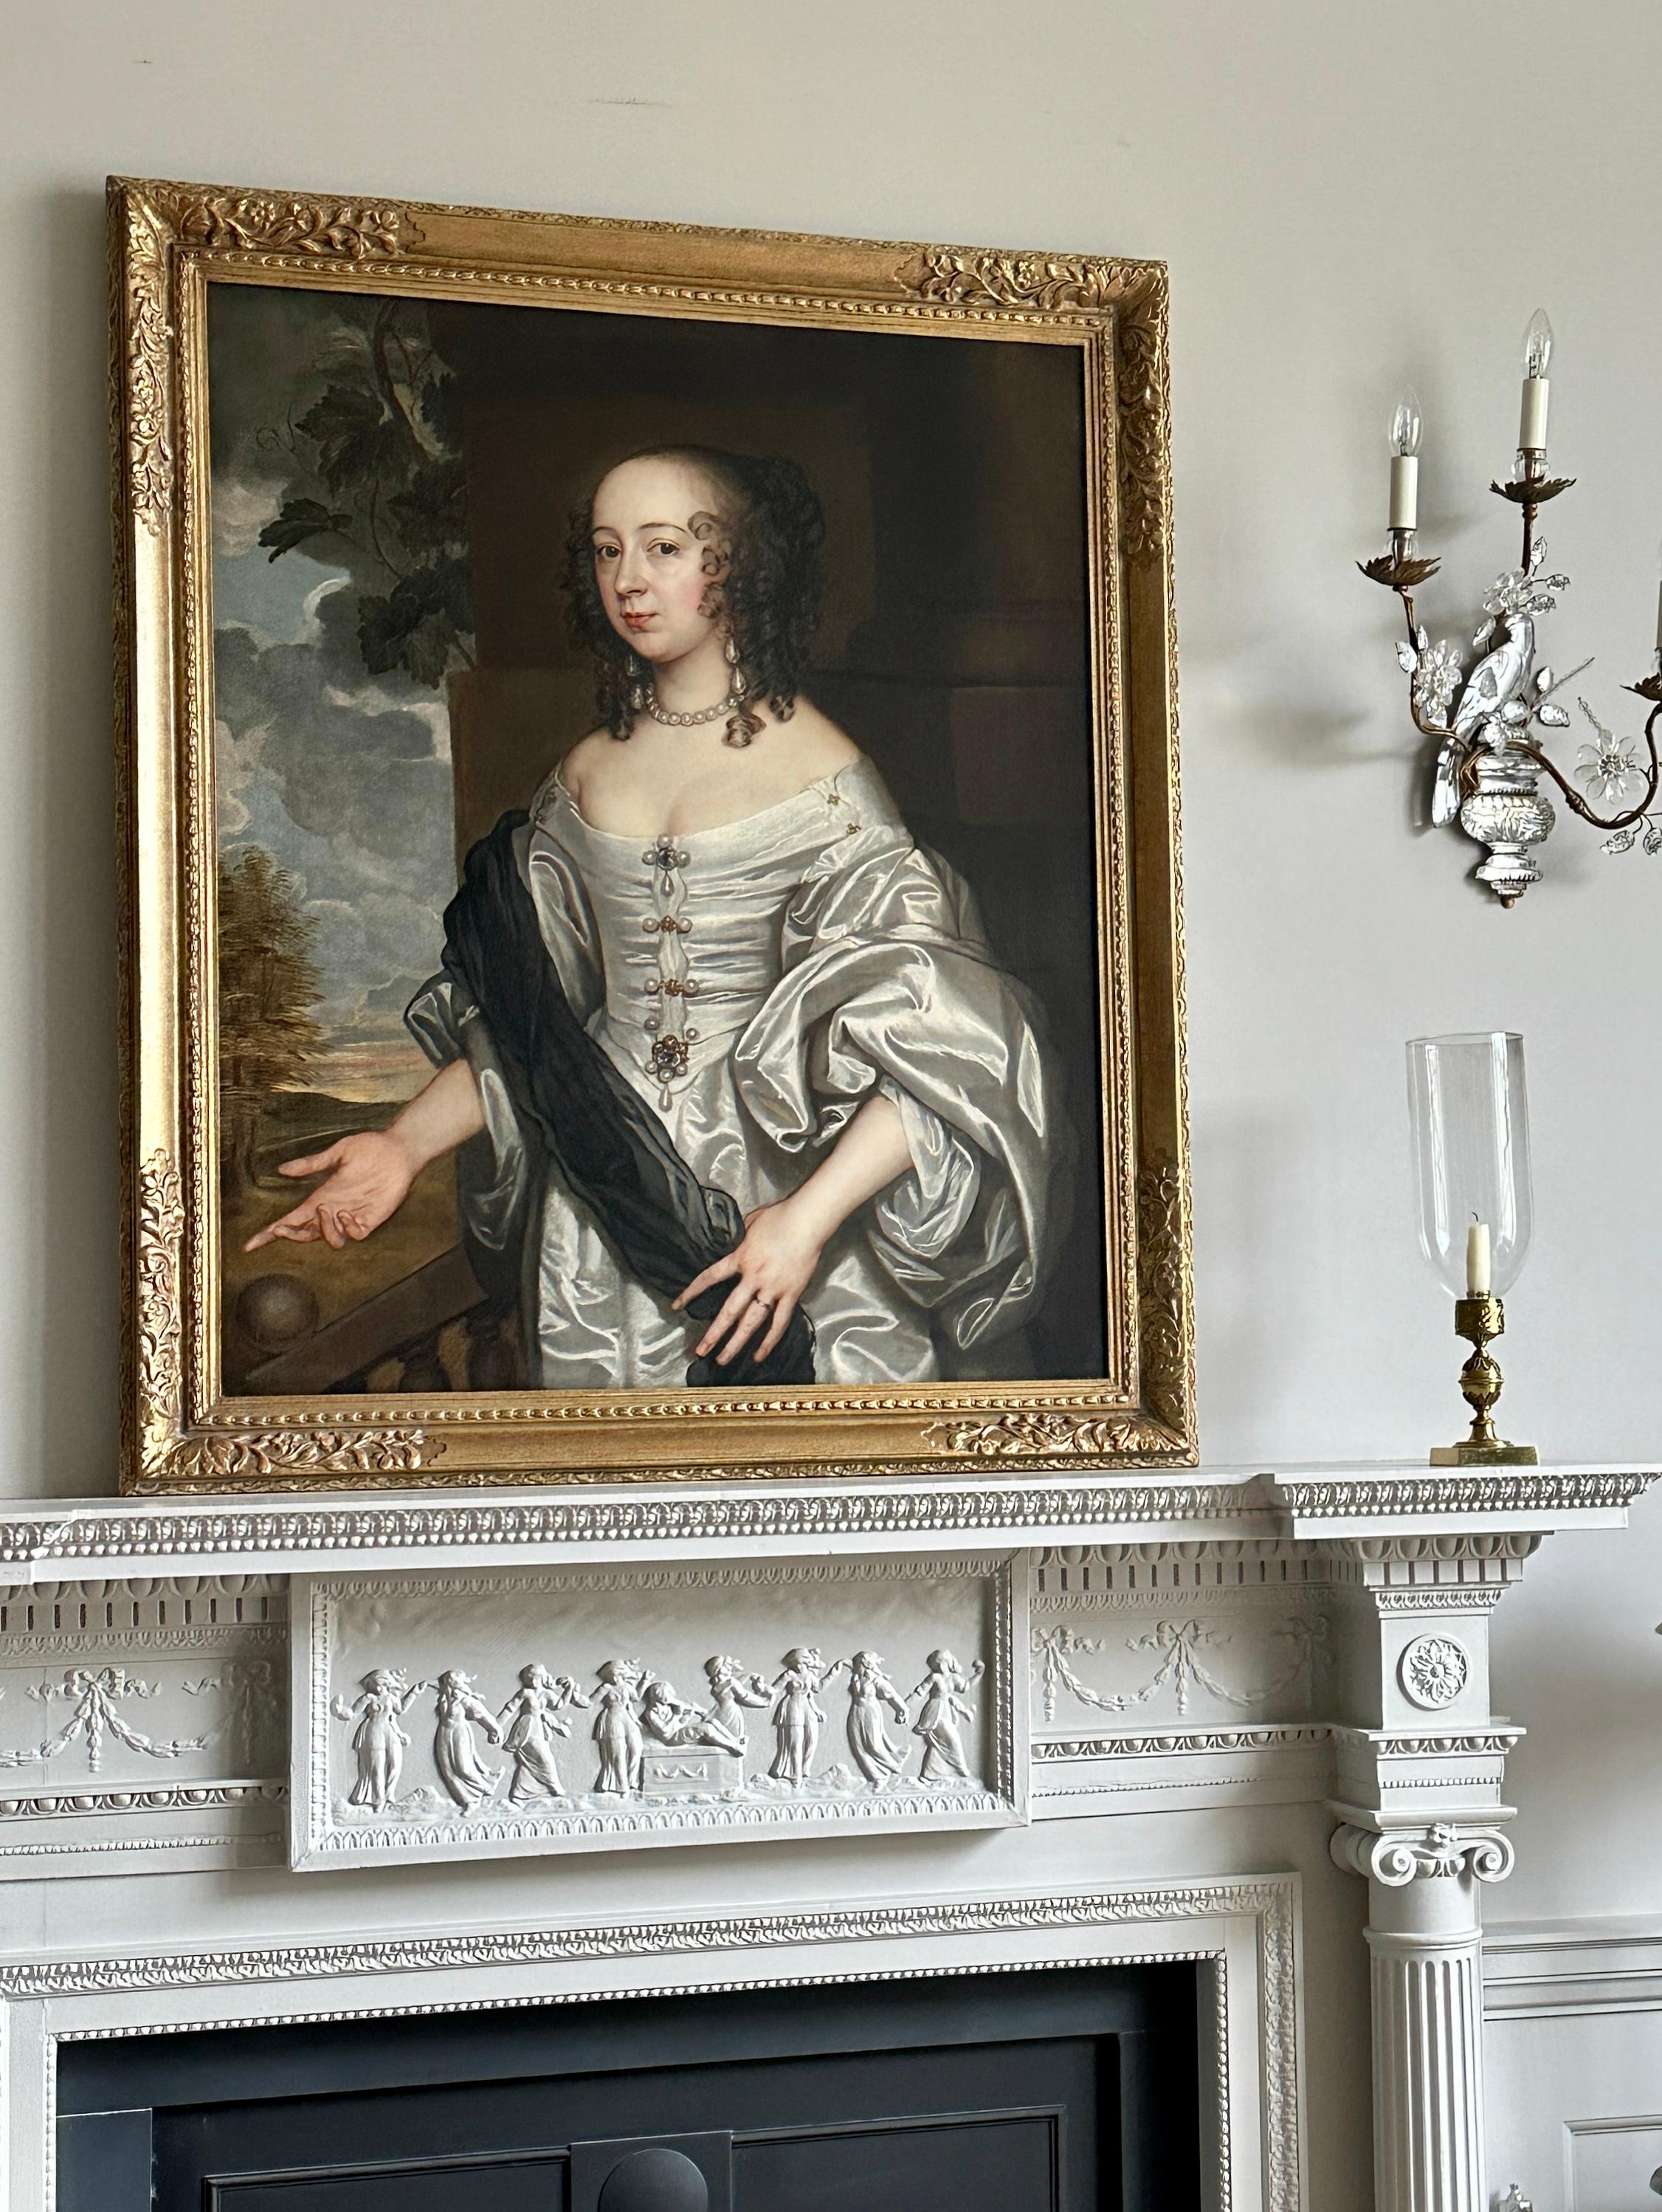 Portrait of a 17th century lady, three-quarter length, in an ivory silk gown standing on a garden terrace.
The lady, painted circa 1670, gestures with her hand towards the gardens and land beyond off her country estate, wearing a sumptuous ivory